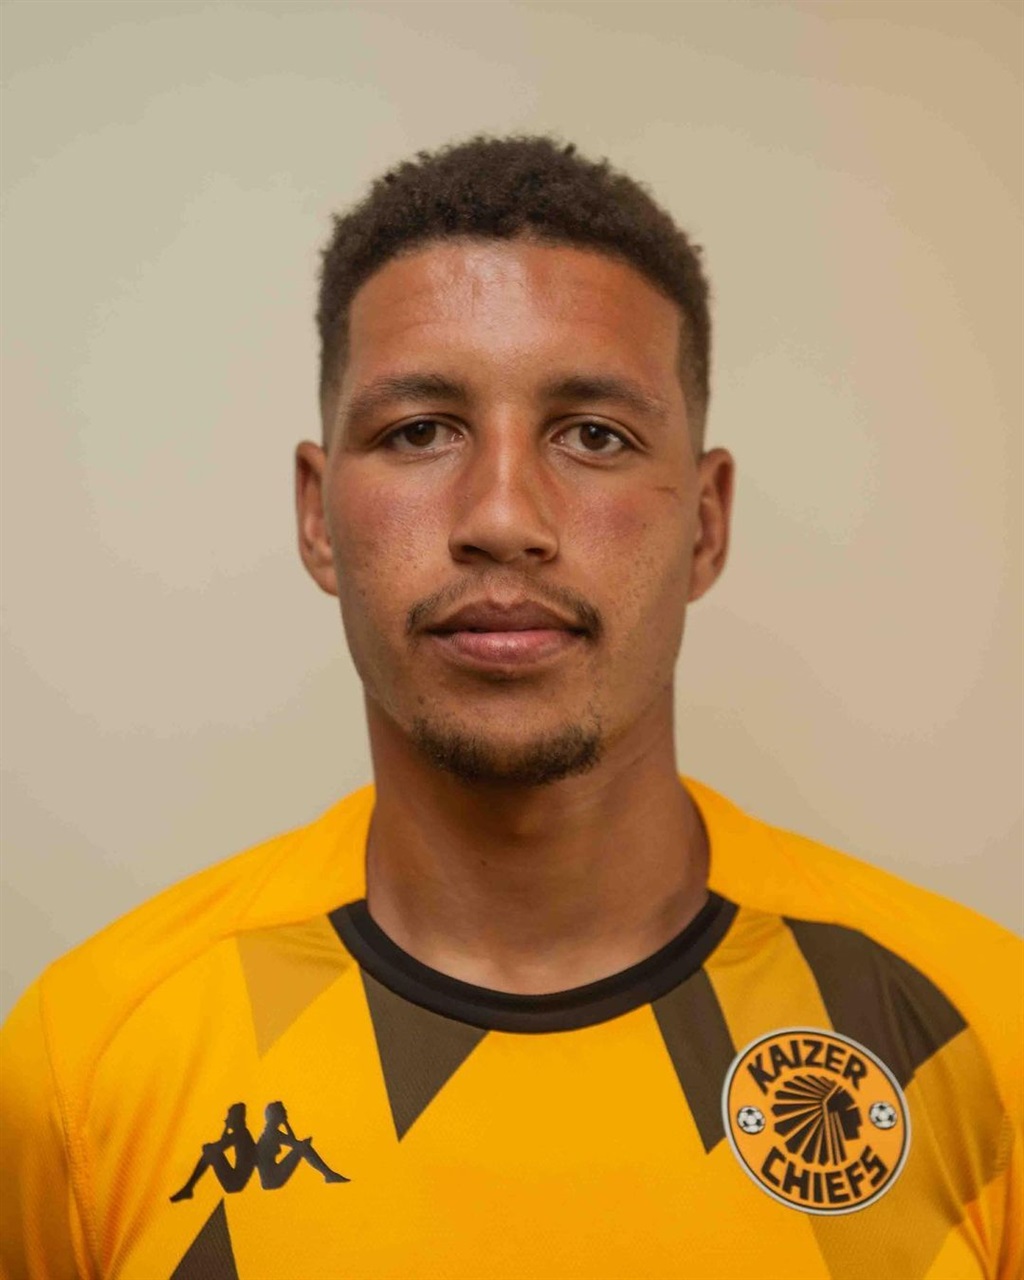 As SA football continues to mourn Fleurs, his teammates and a local rapper used art to pay tribute to the late Kaizer Chiefs defender.